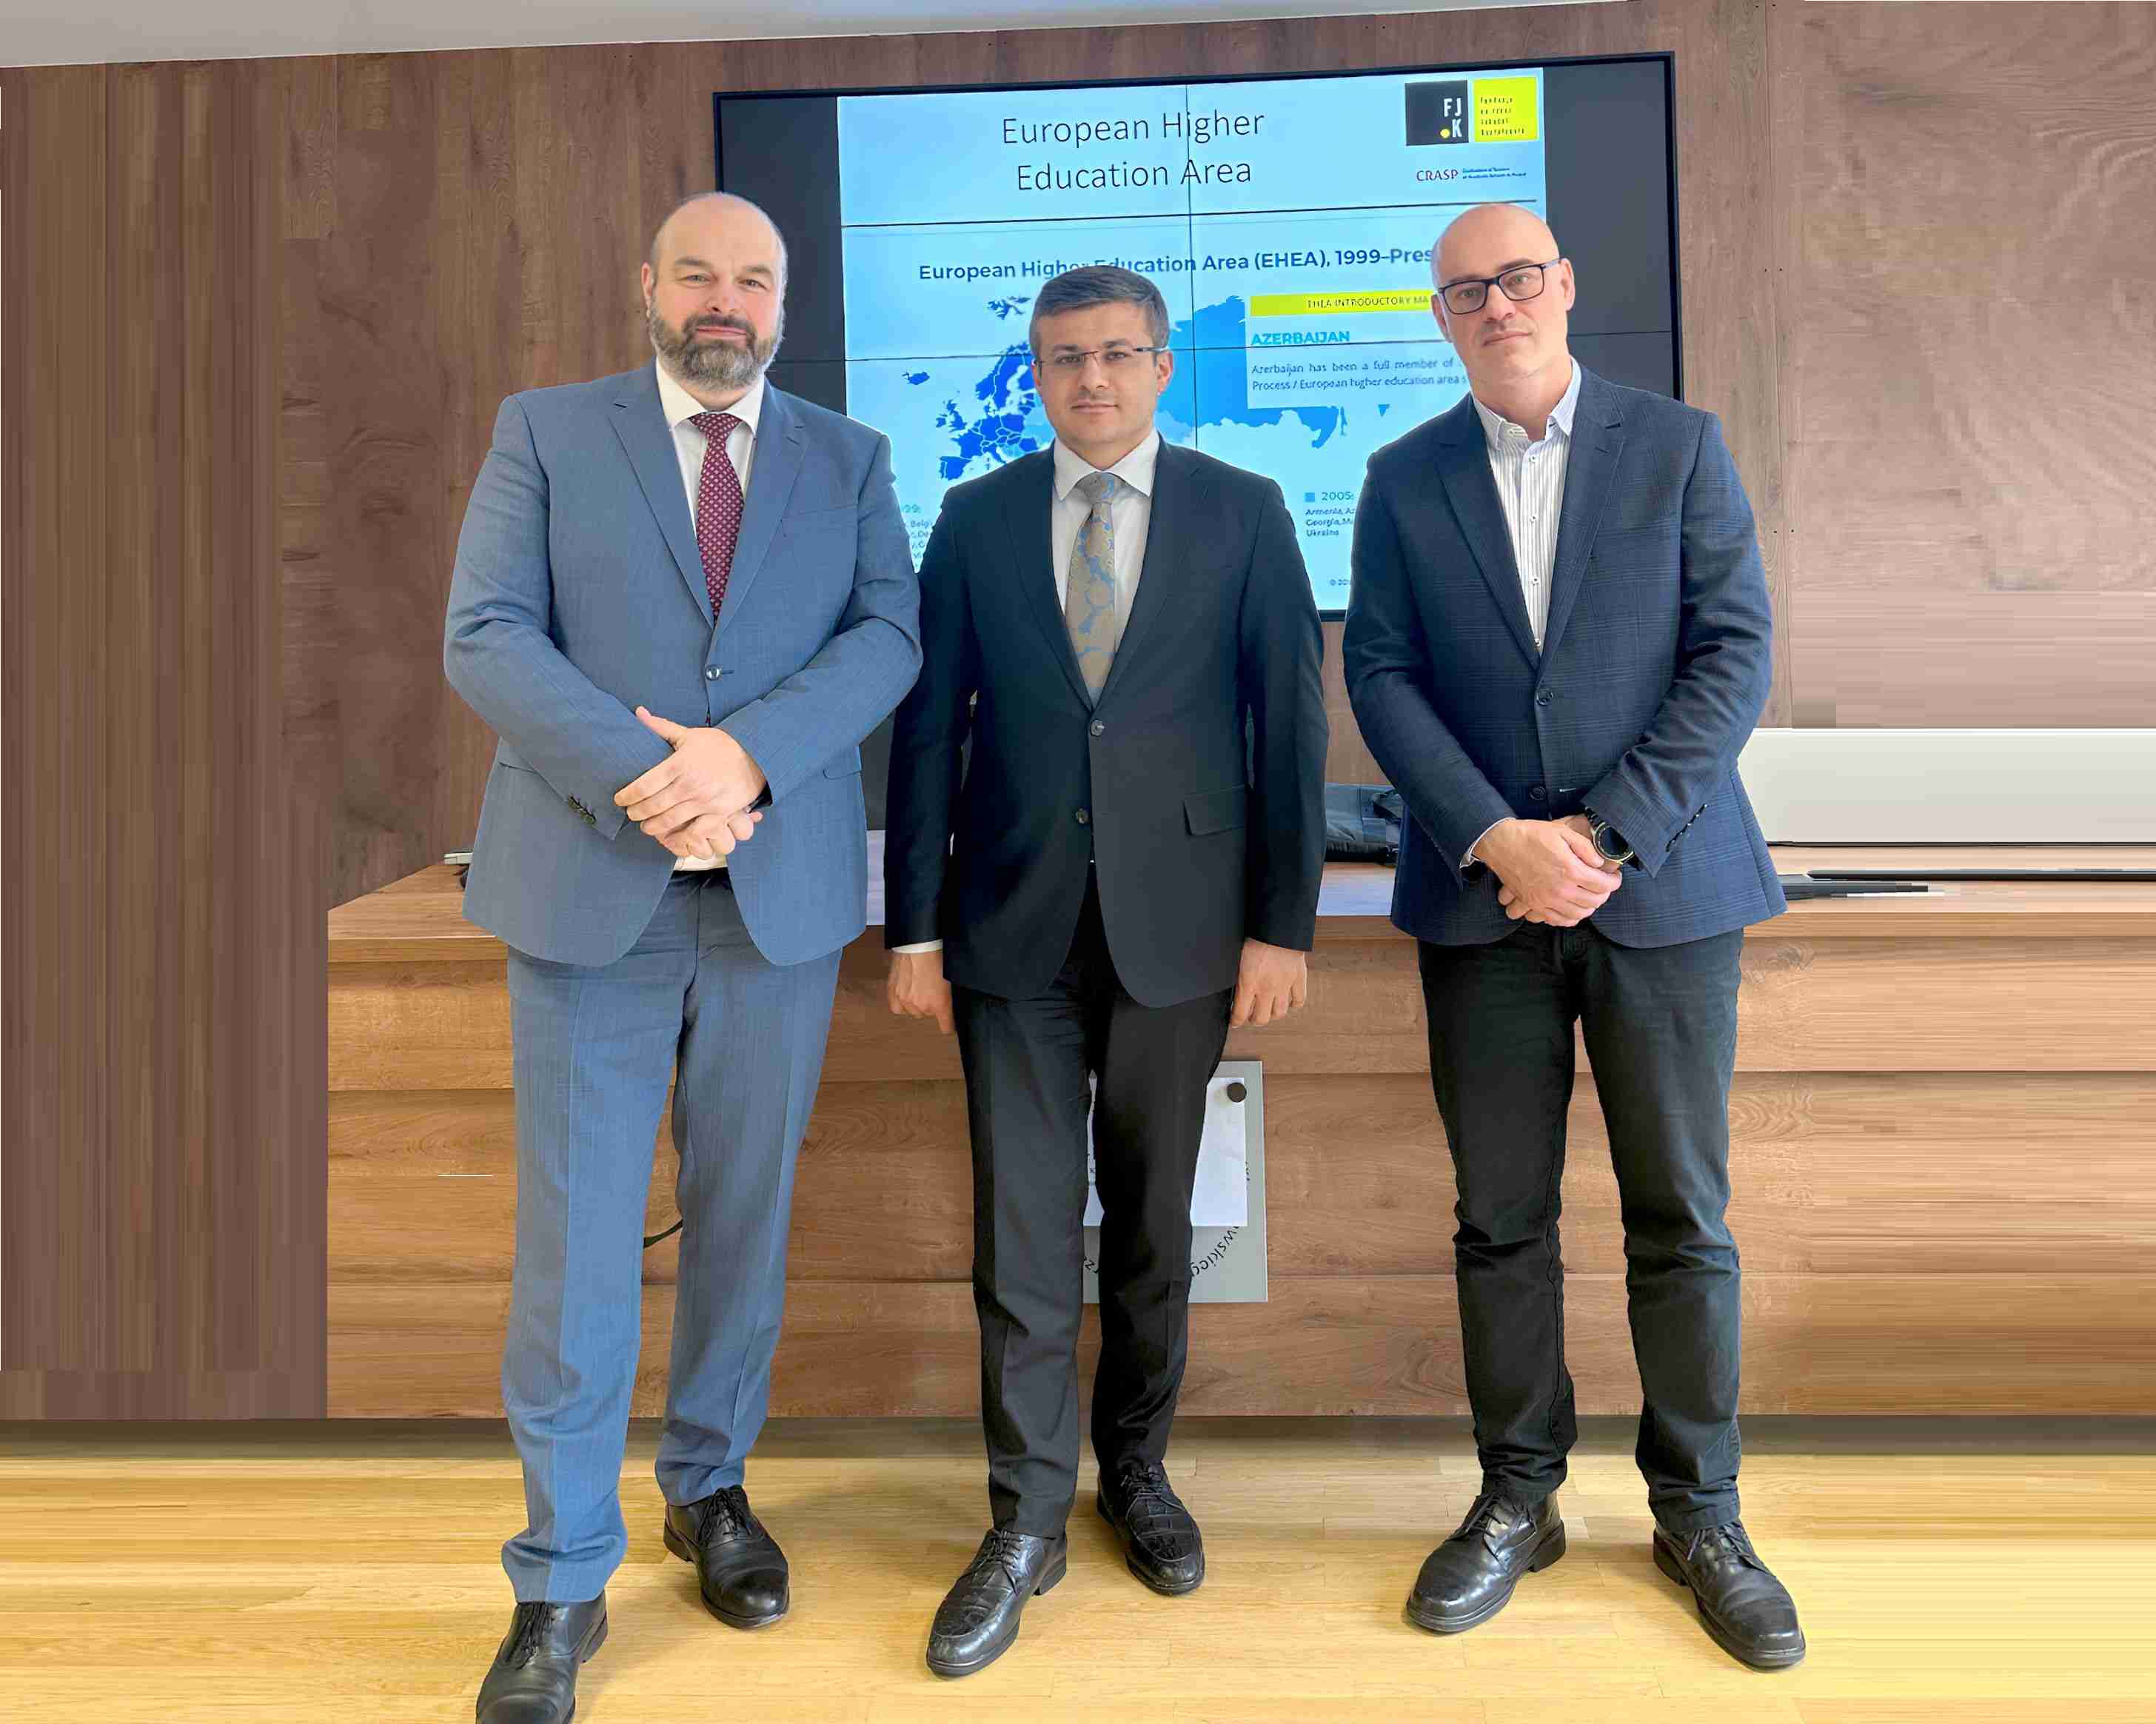 The next meeting was held at the University of Warsaw in Poland within the framework of the project "The role of the rectors' conference in the development of the higher education system"